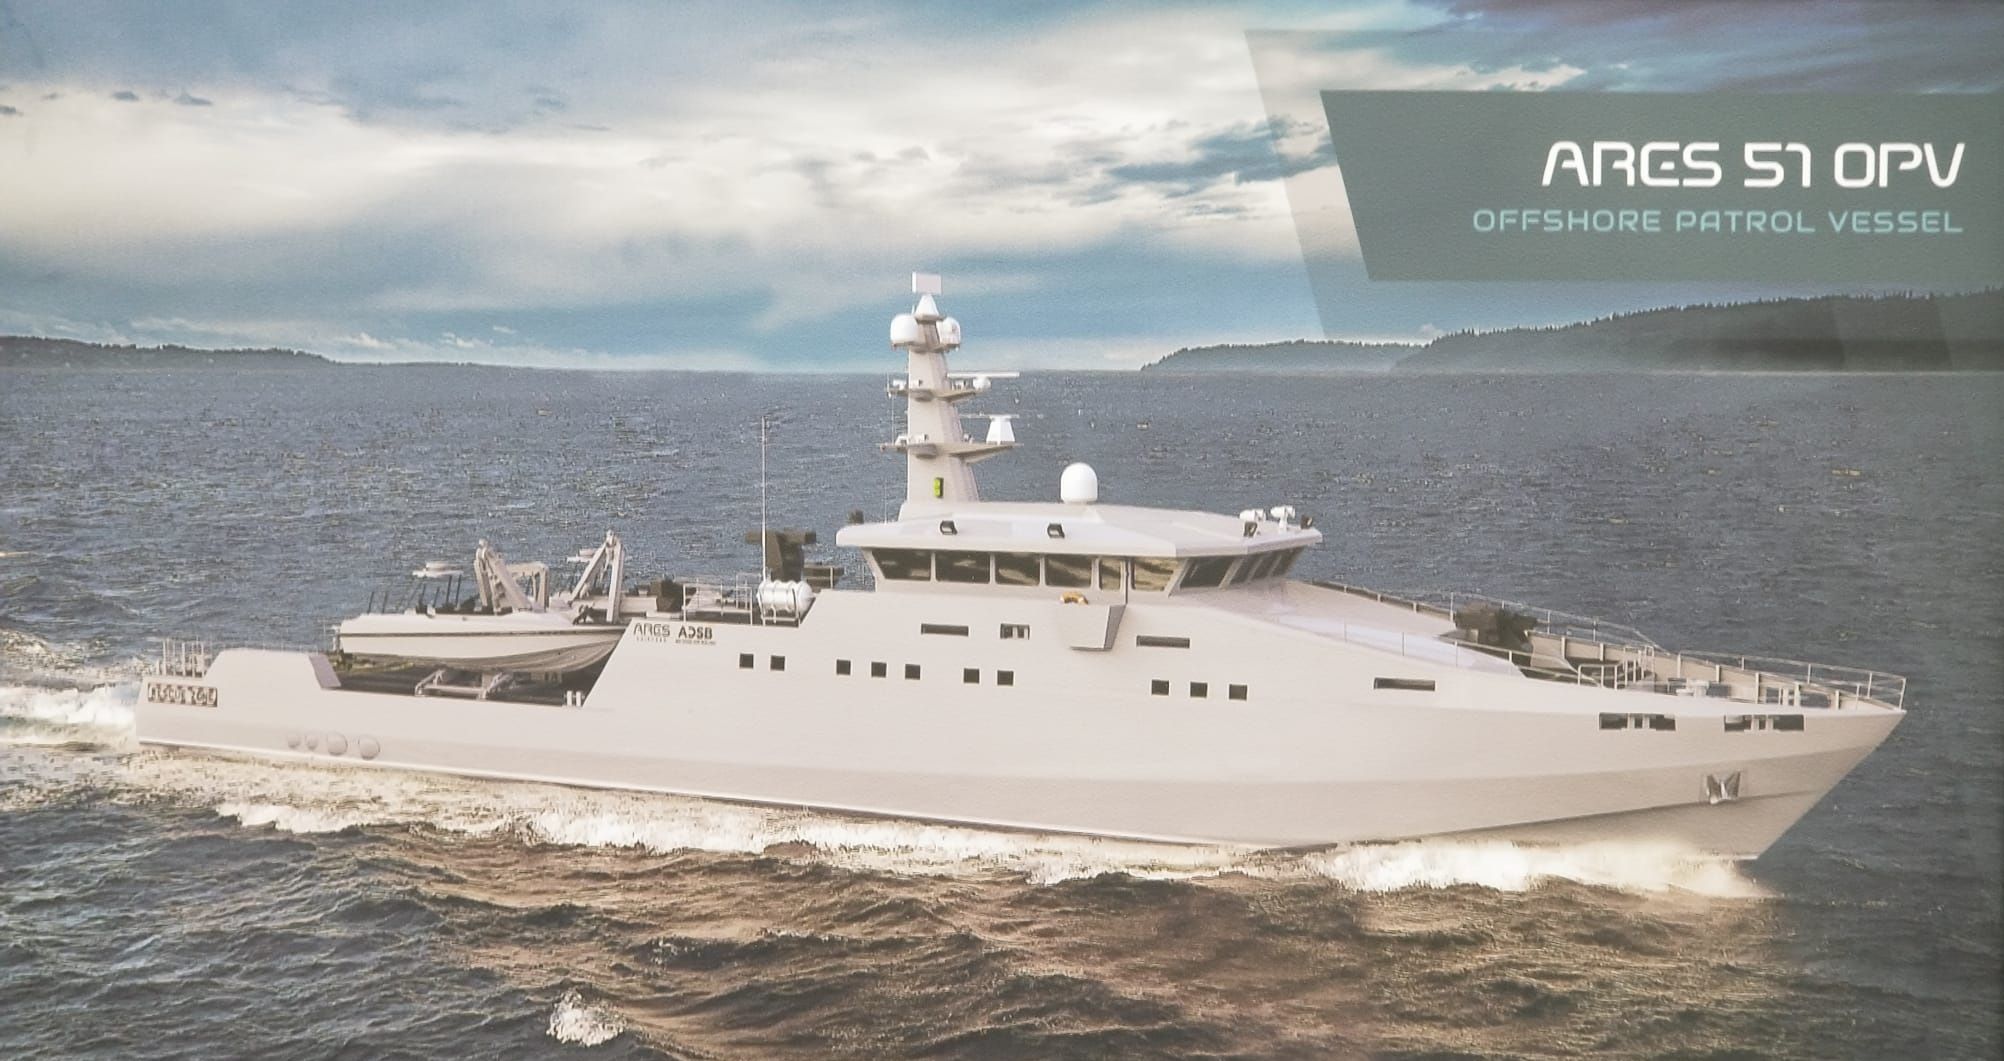 Ares Shipyard Presents its OPV solution at NAVDEX